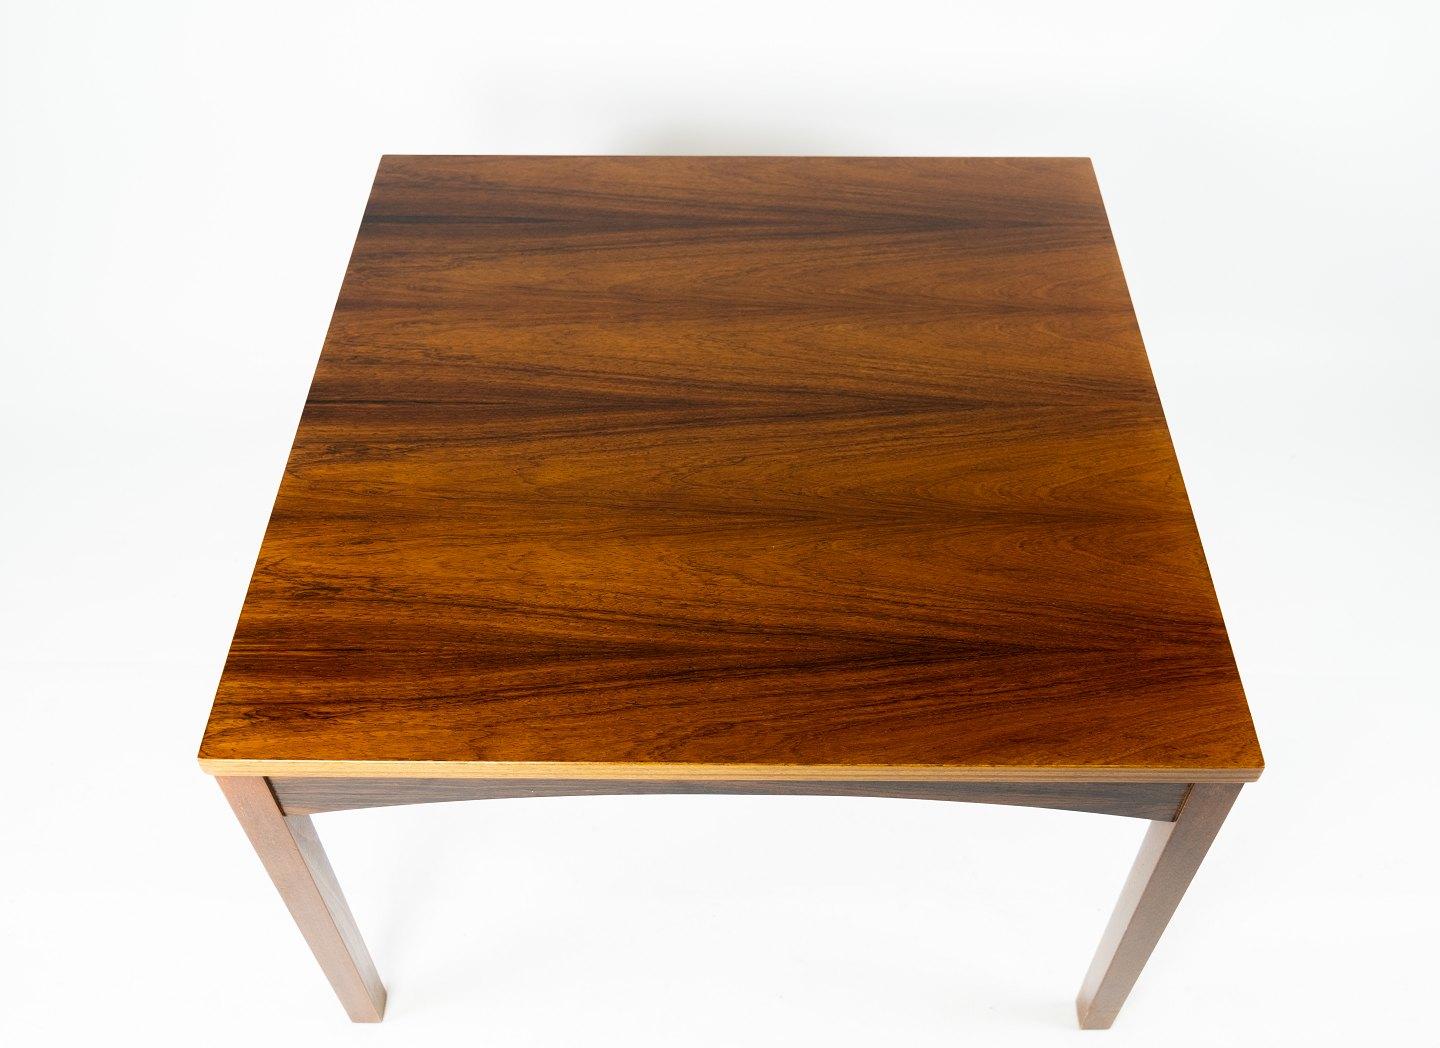 Coffee table in rosewood of Danish design from the 1960s. The table is in great vintage condition.
Measures: H - 45 cm, W - 70 cm and D - 70 cm.